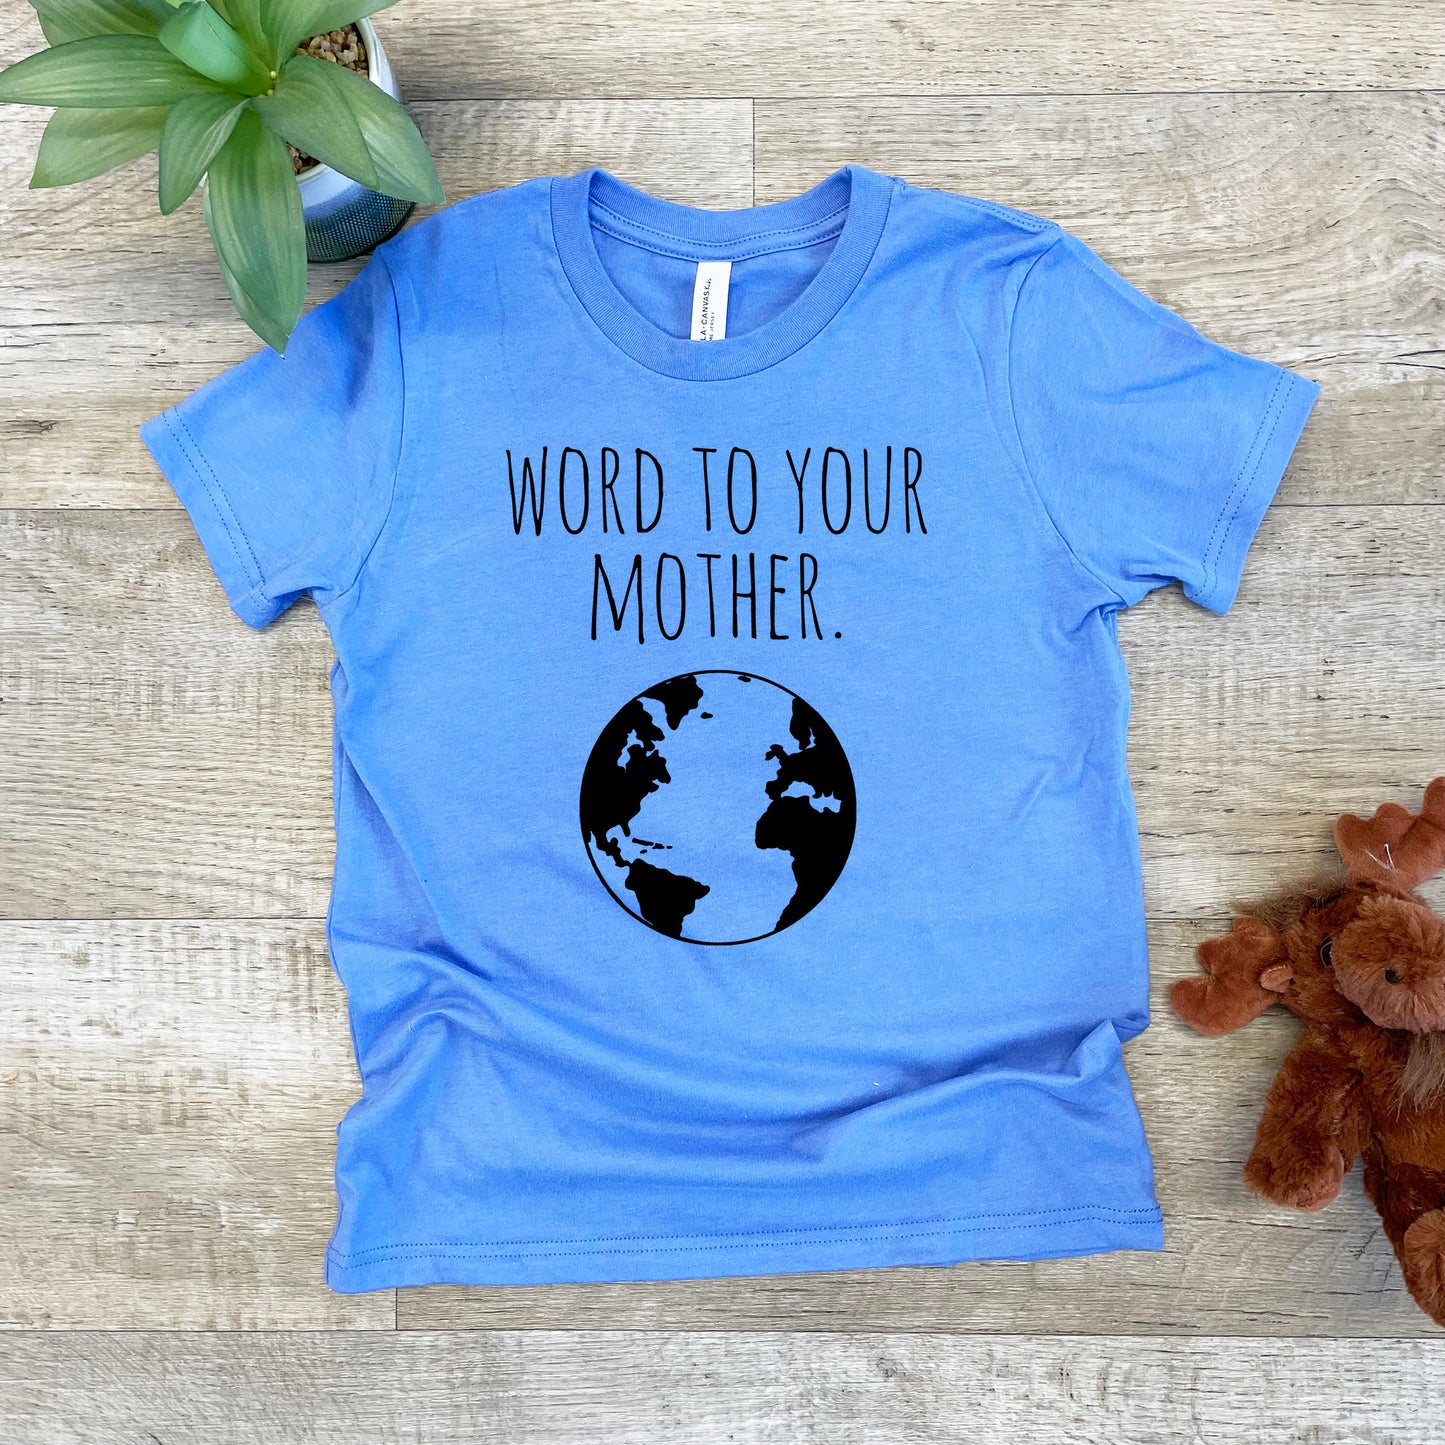 Word to Your Mother (Earth) - Kid's Tee - Columbia Blue or Lavender